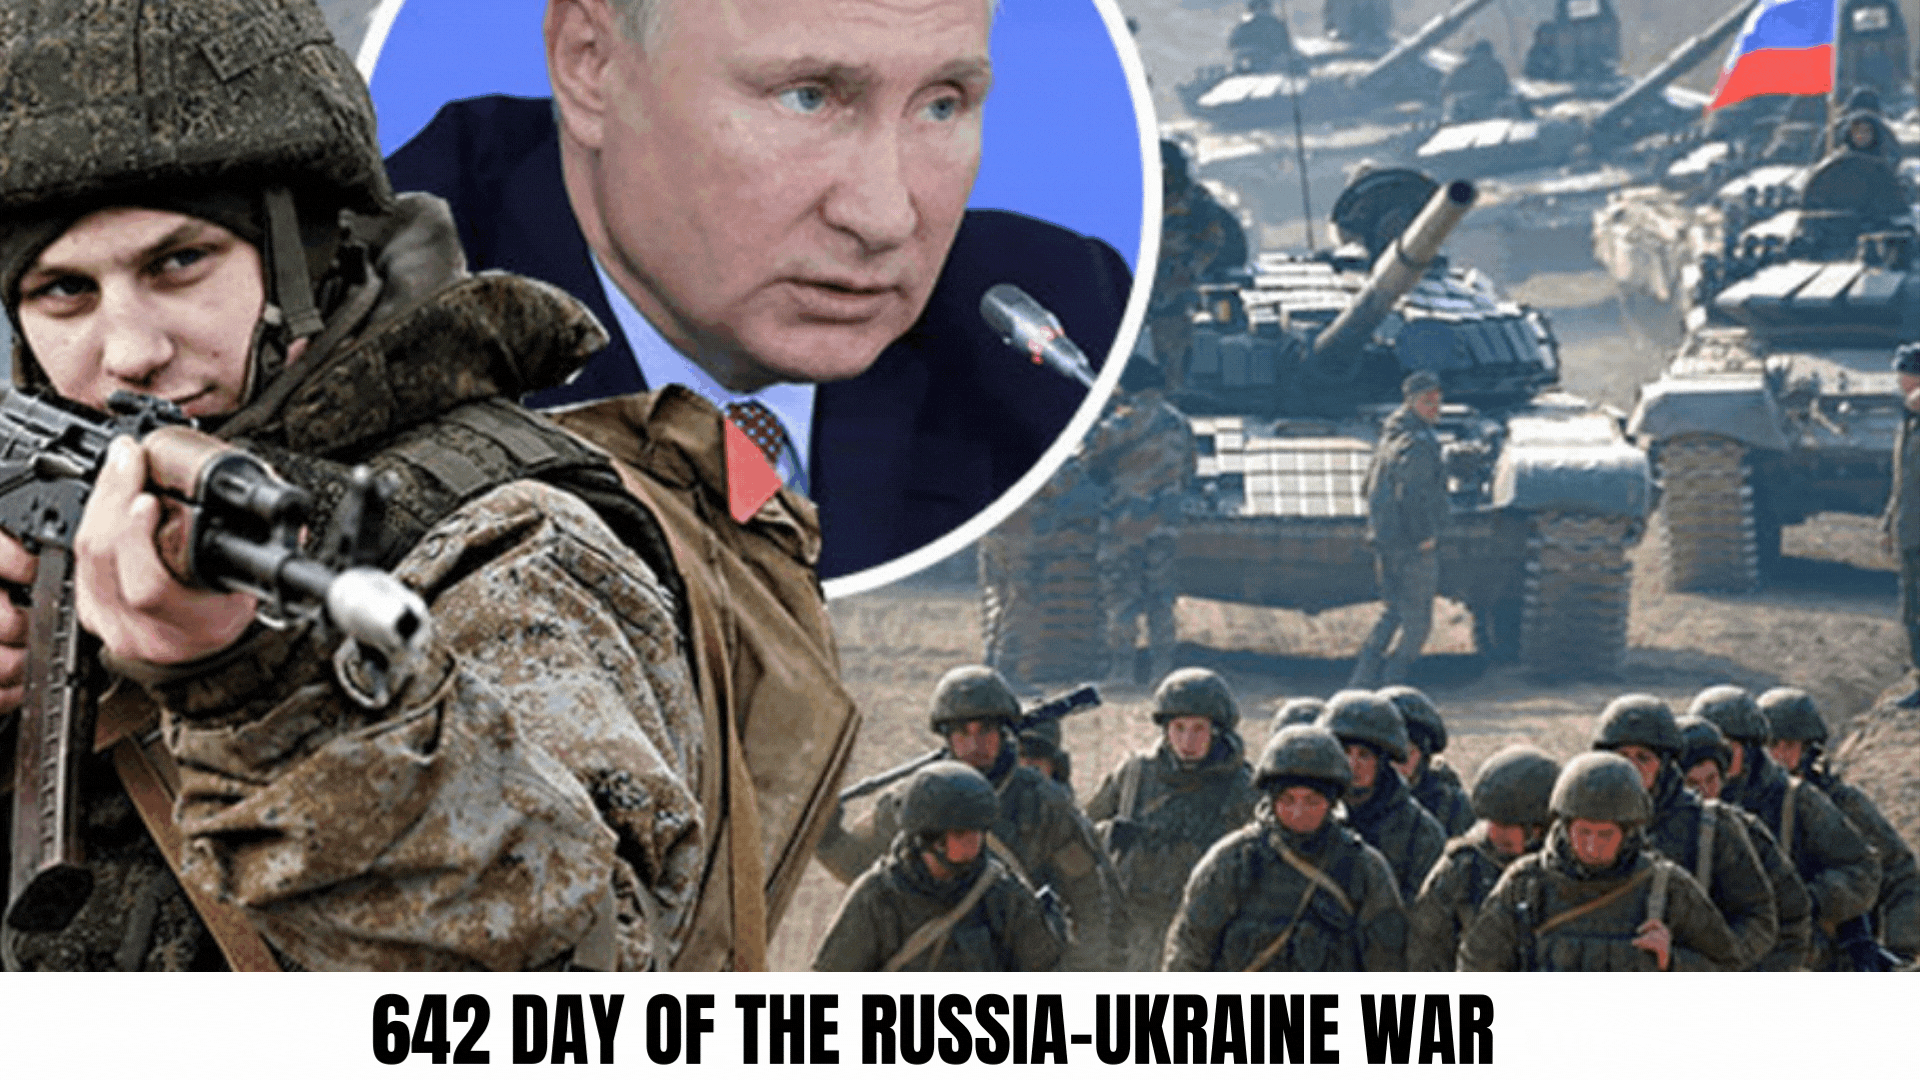 642 Day of the Russia-Ukraine War: The Ongoing Crisis